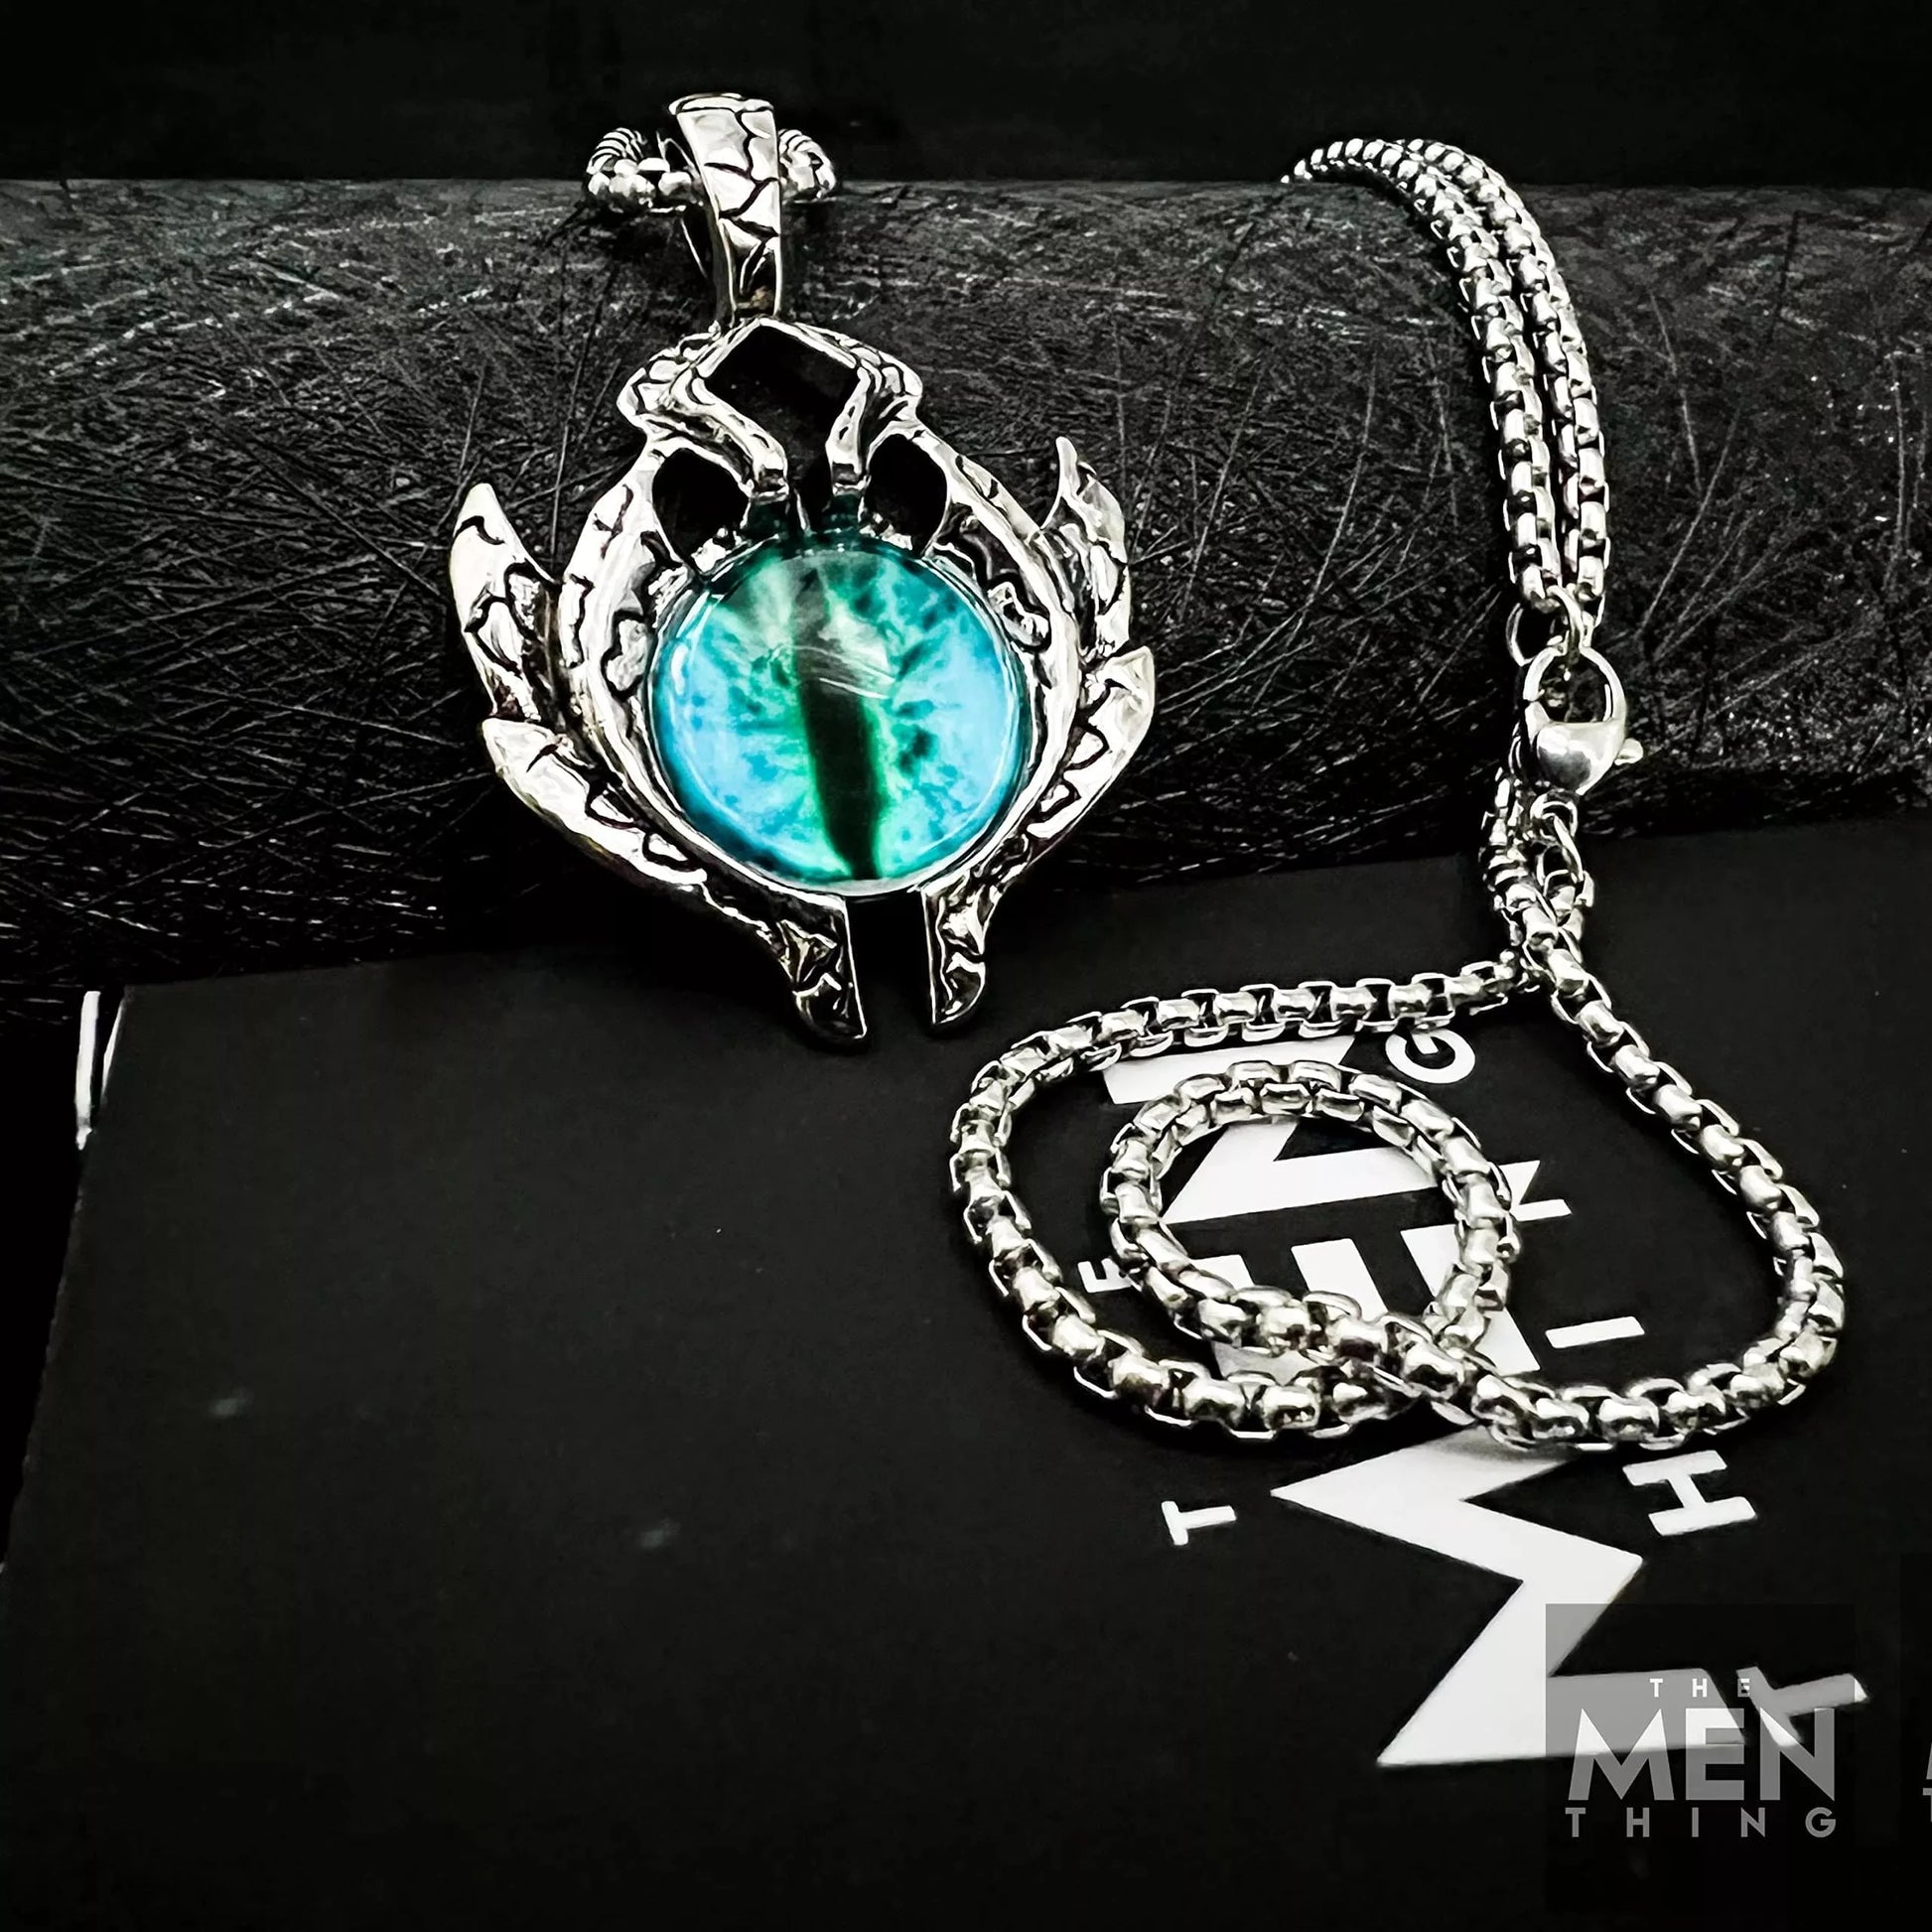 THE MEN THING Pendant for Men - Pure Titanium Steel Blue Eye Pendant with 24inch Round Box Chain for Men & Boys